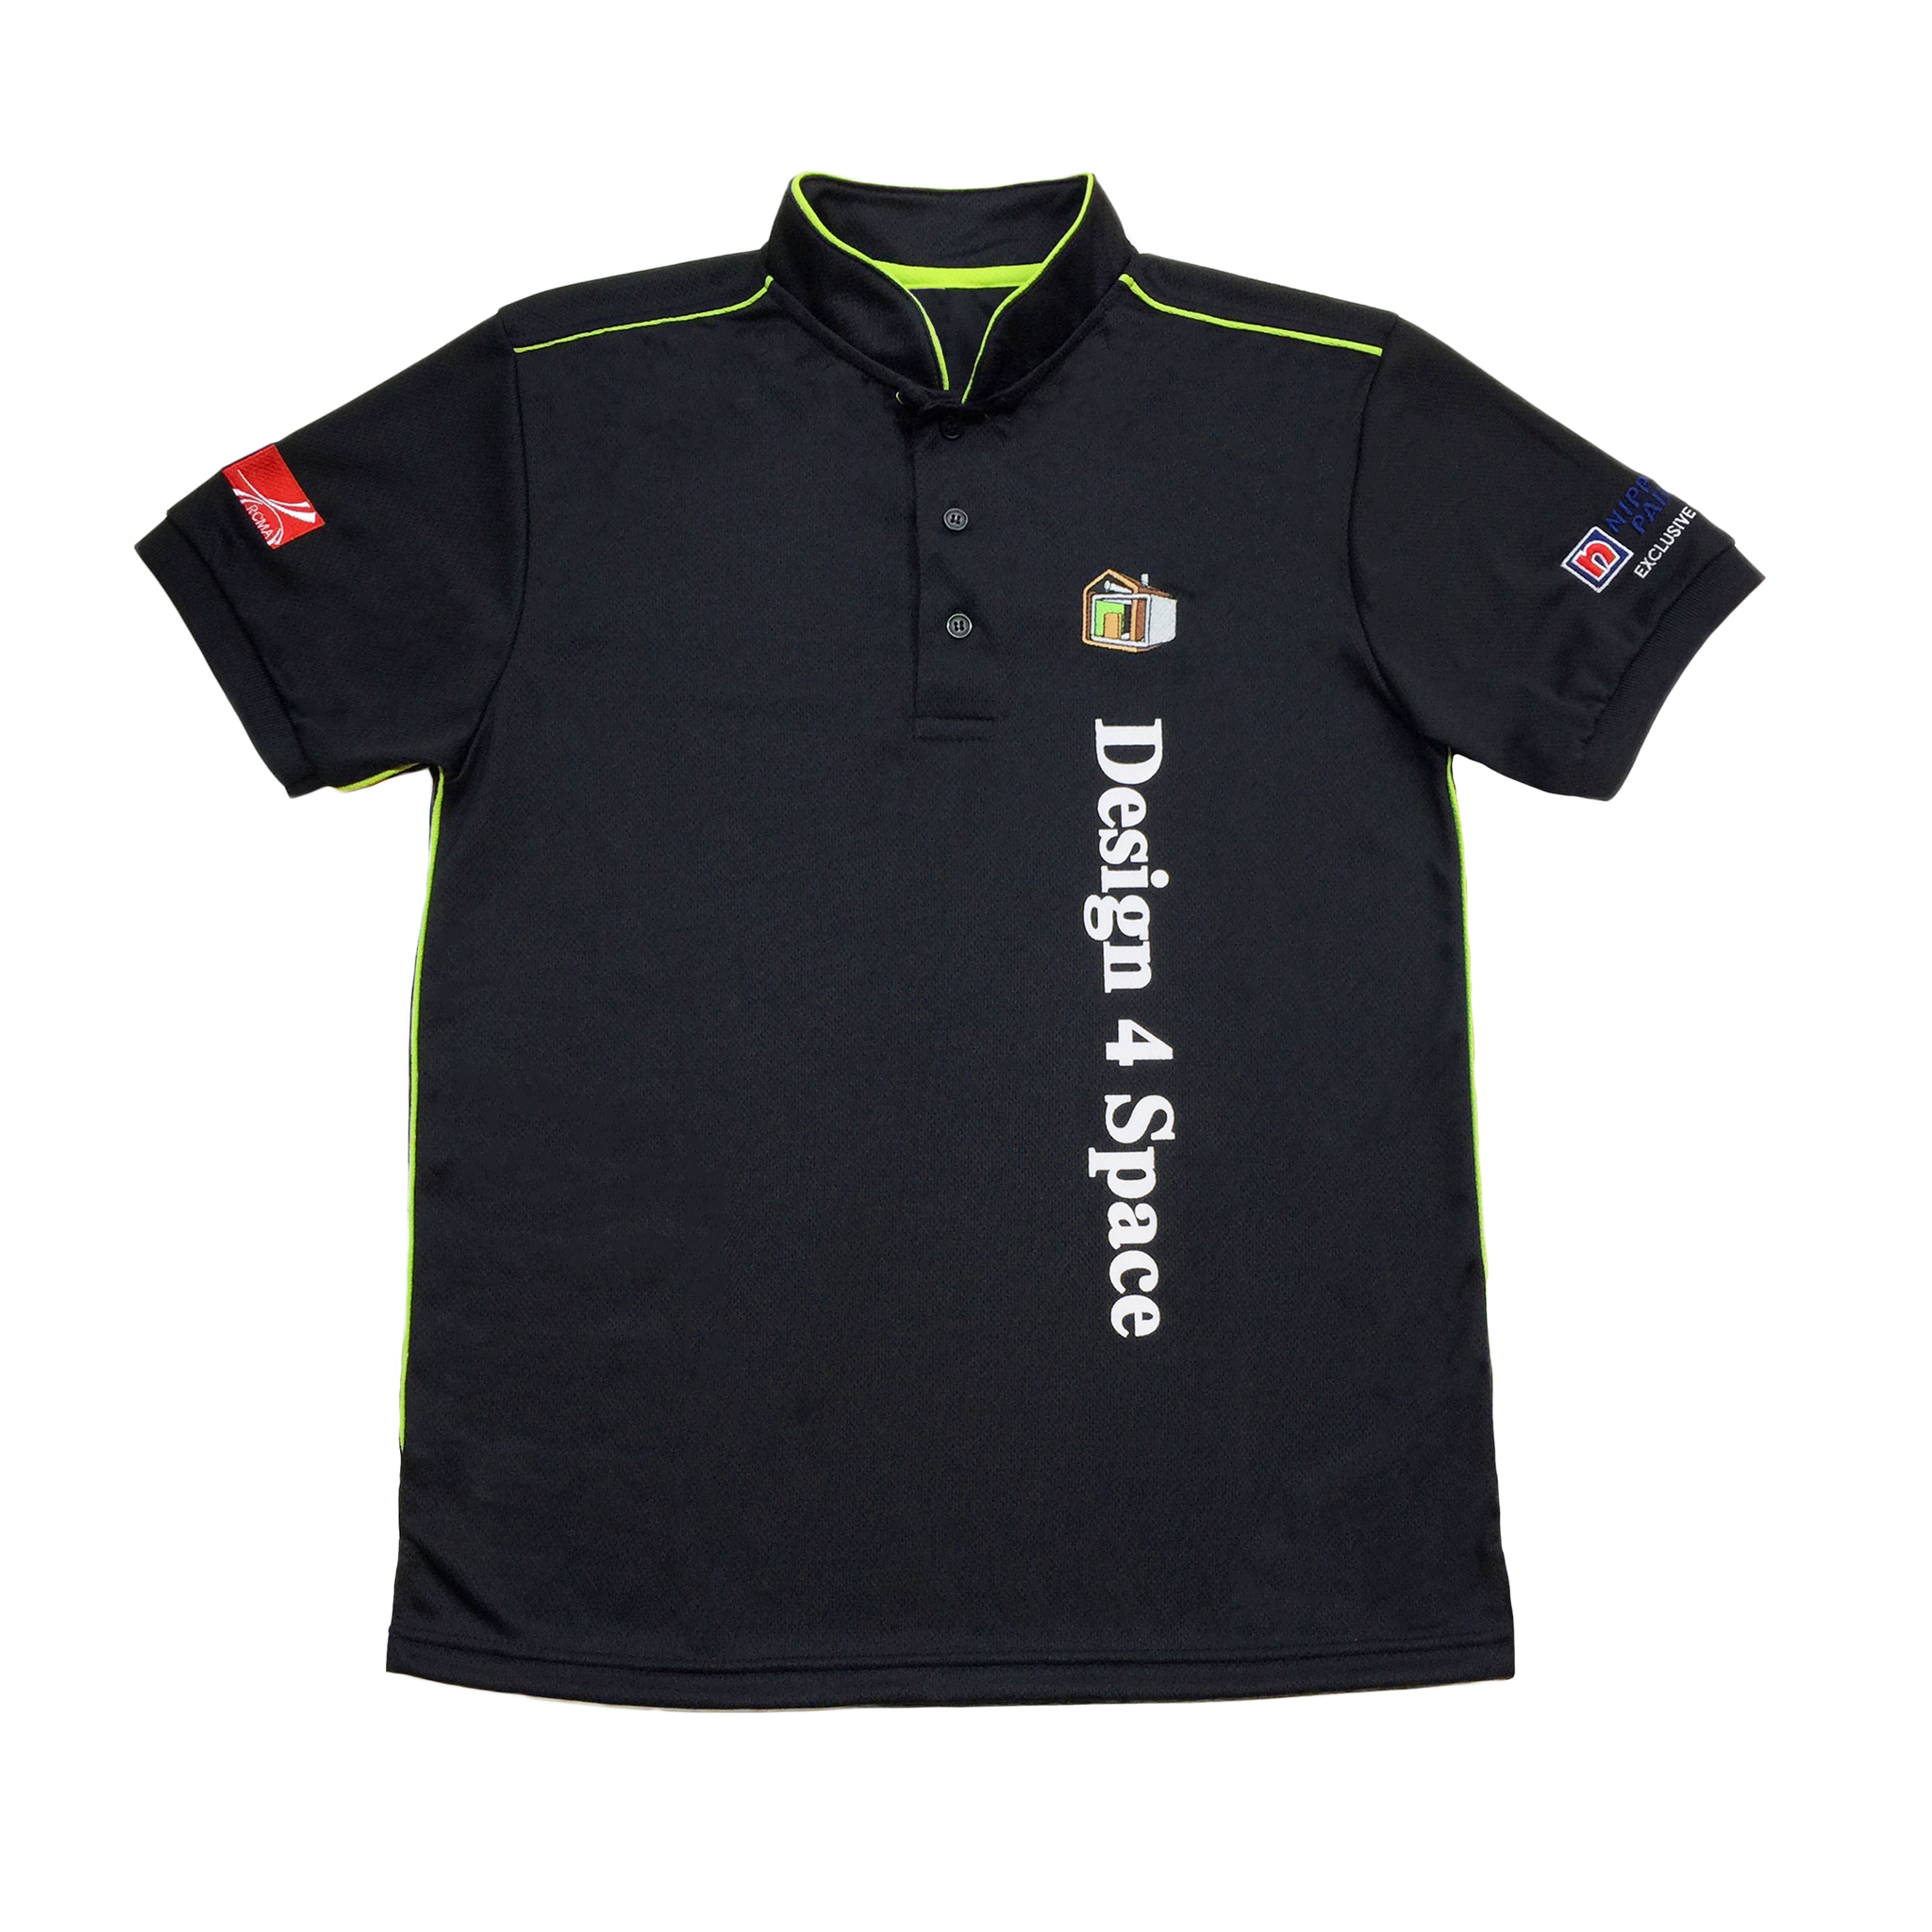 Customised mandarin collar polo tee shirt with green piping and embroidered logos on chest and sleeves, plus silkscreen large words on the front and back.